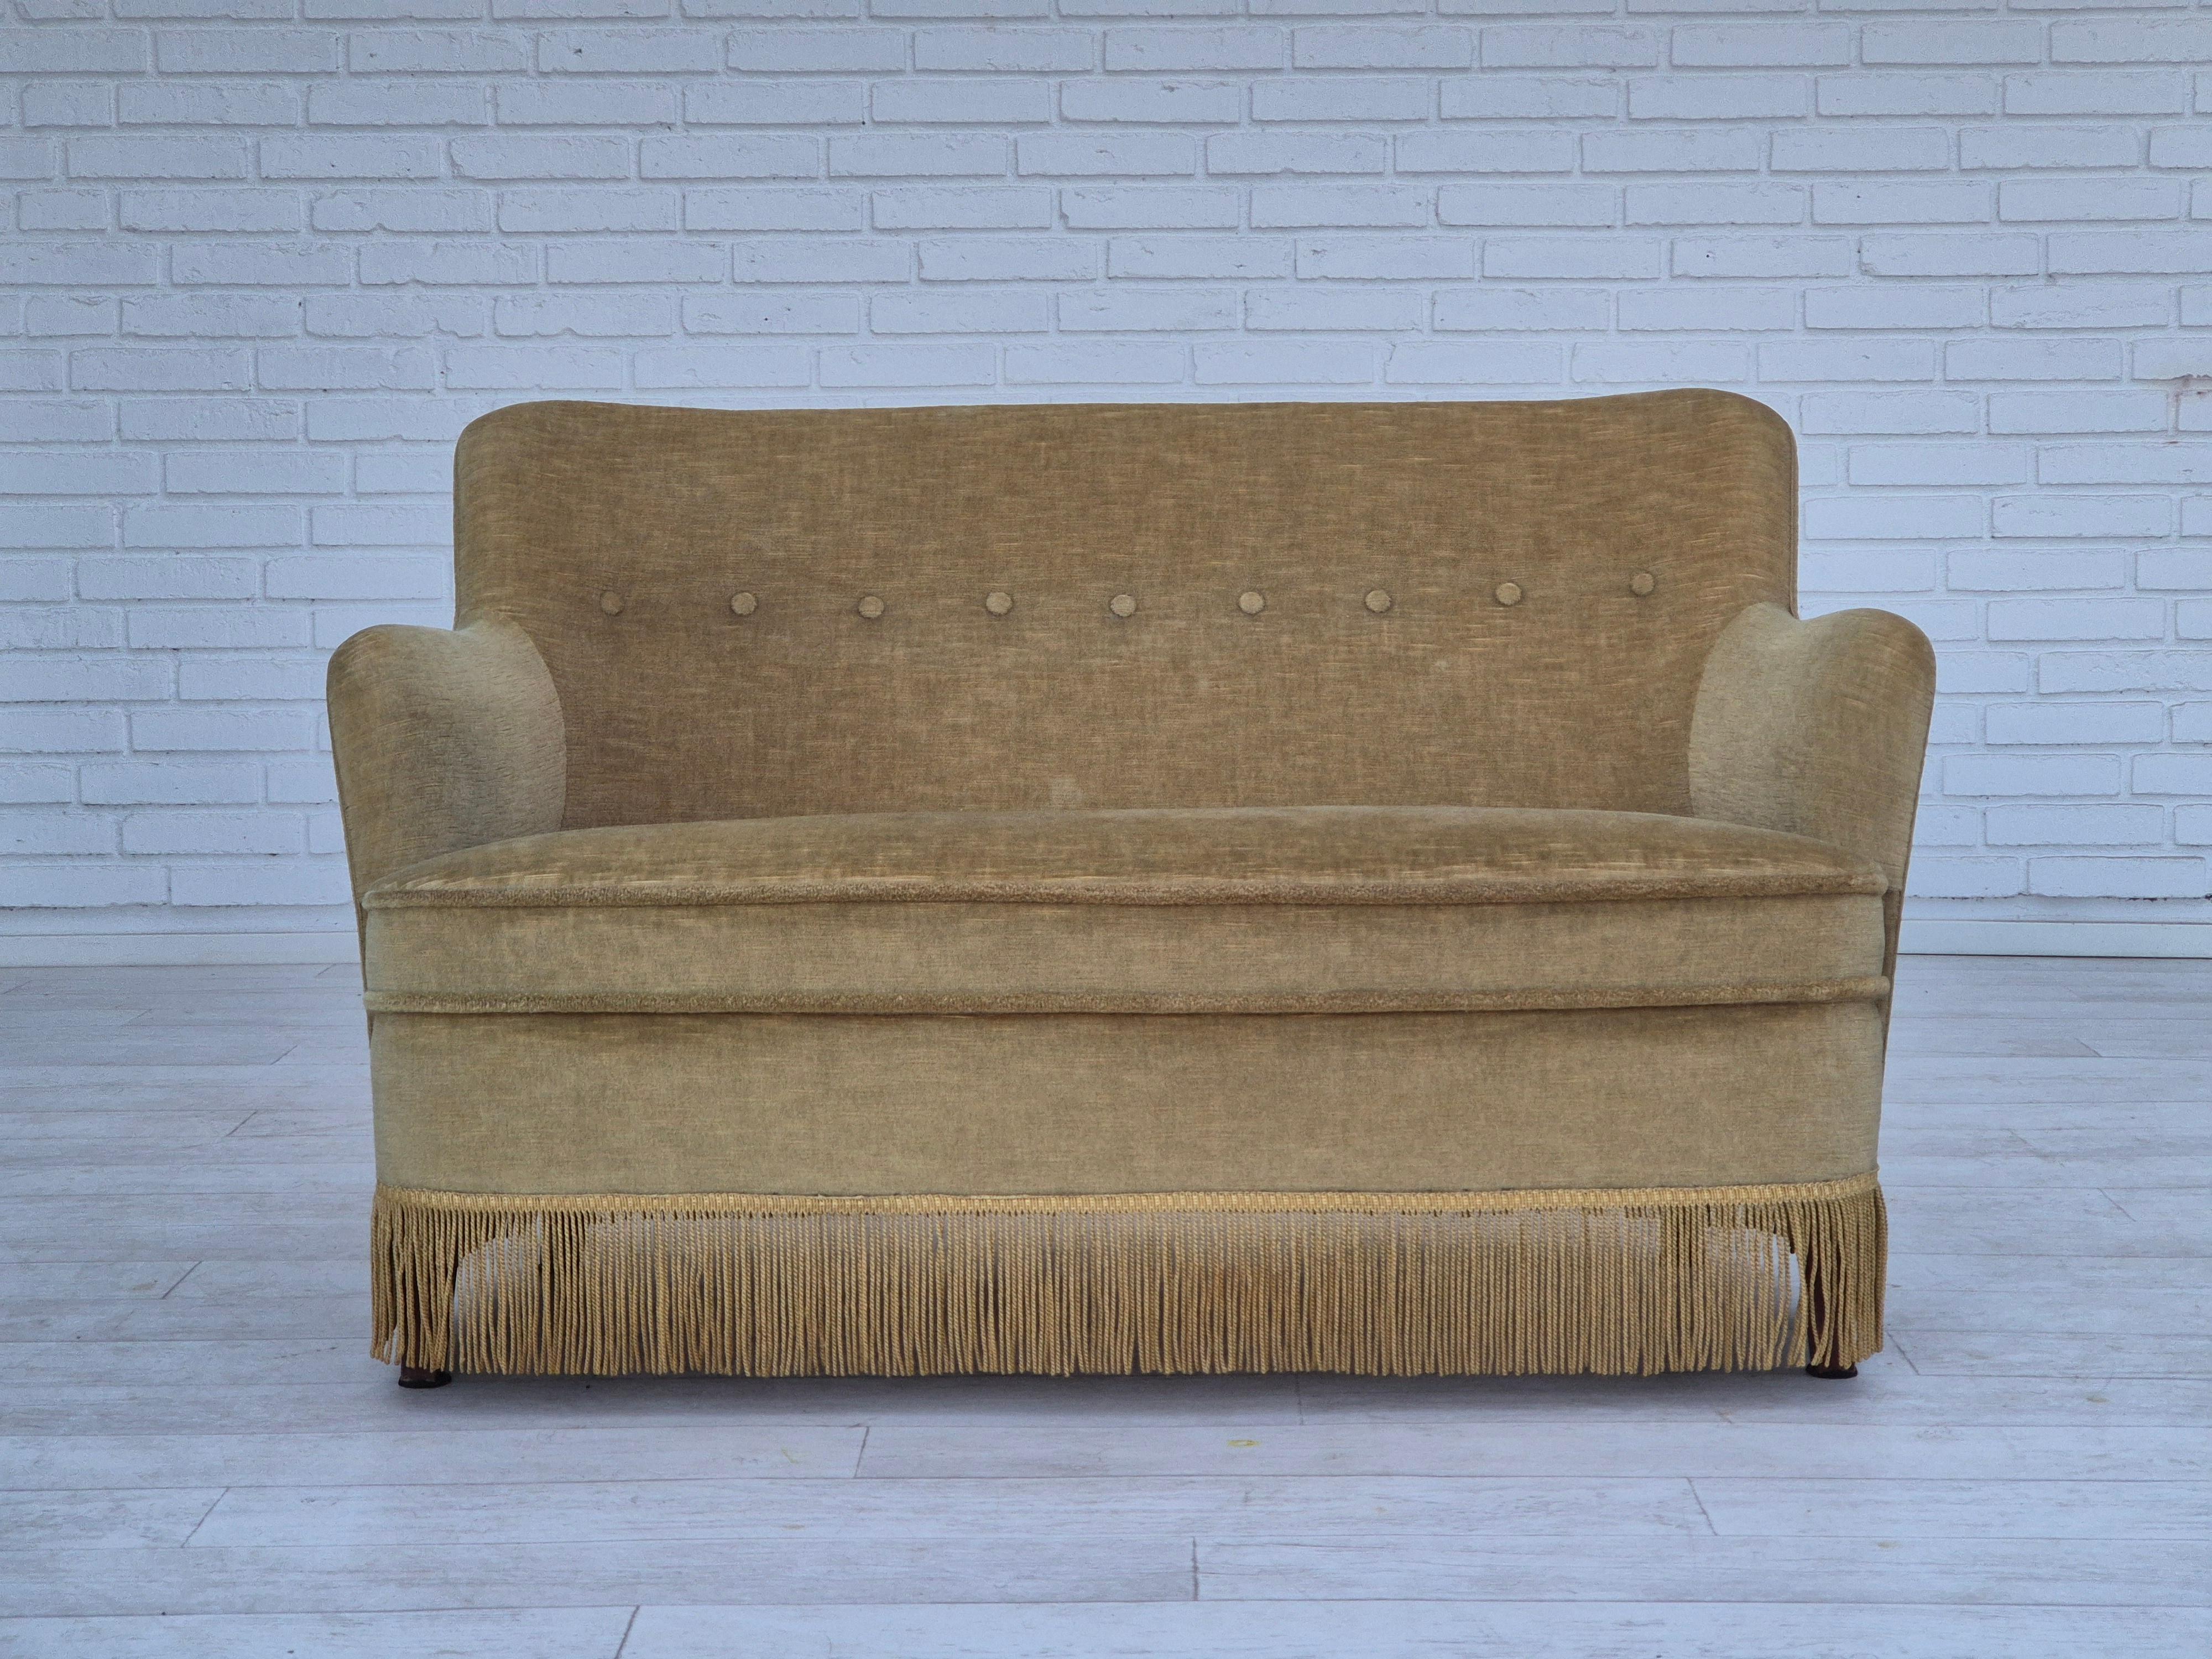 1970s, Danish little 2 seater sofa in original very good condition: no smells and no stains. Original light green furniture velour, beech wood legs. Springs in the seat. Manufactured by Danish furniture manufacturer in about 1970s.